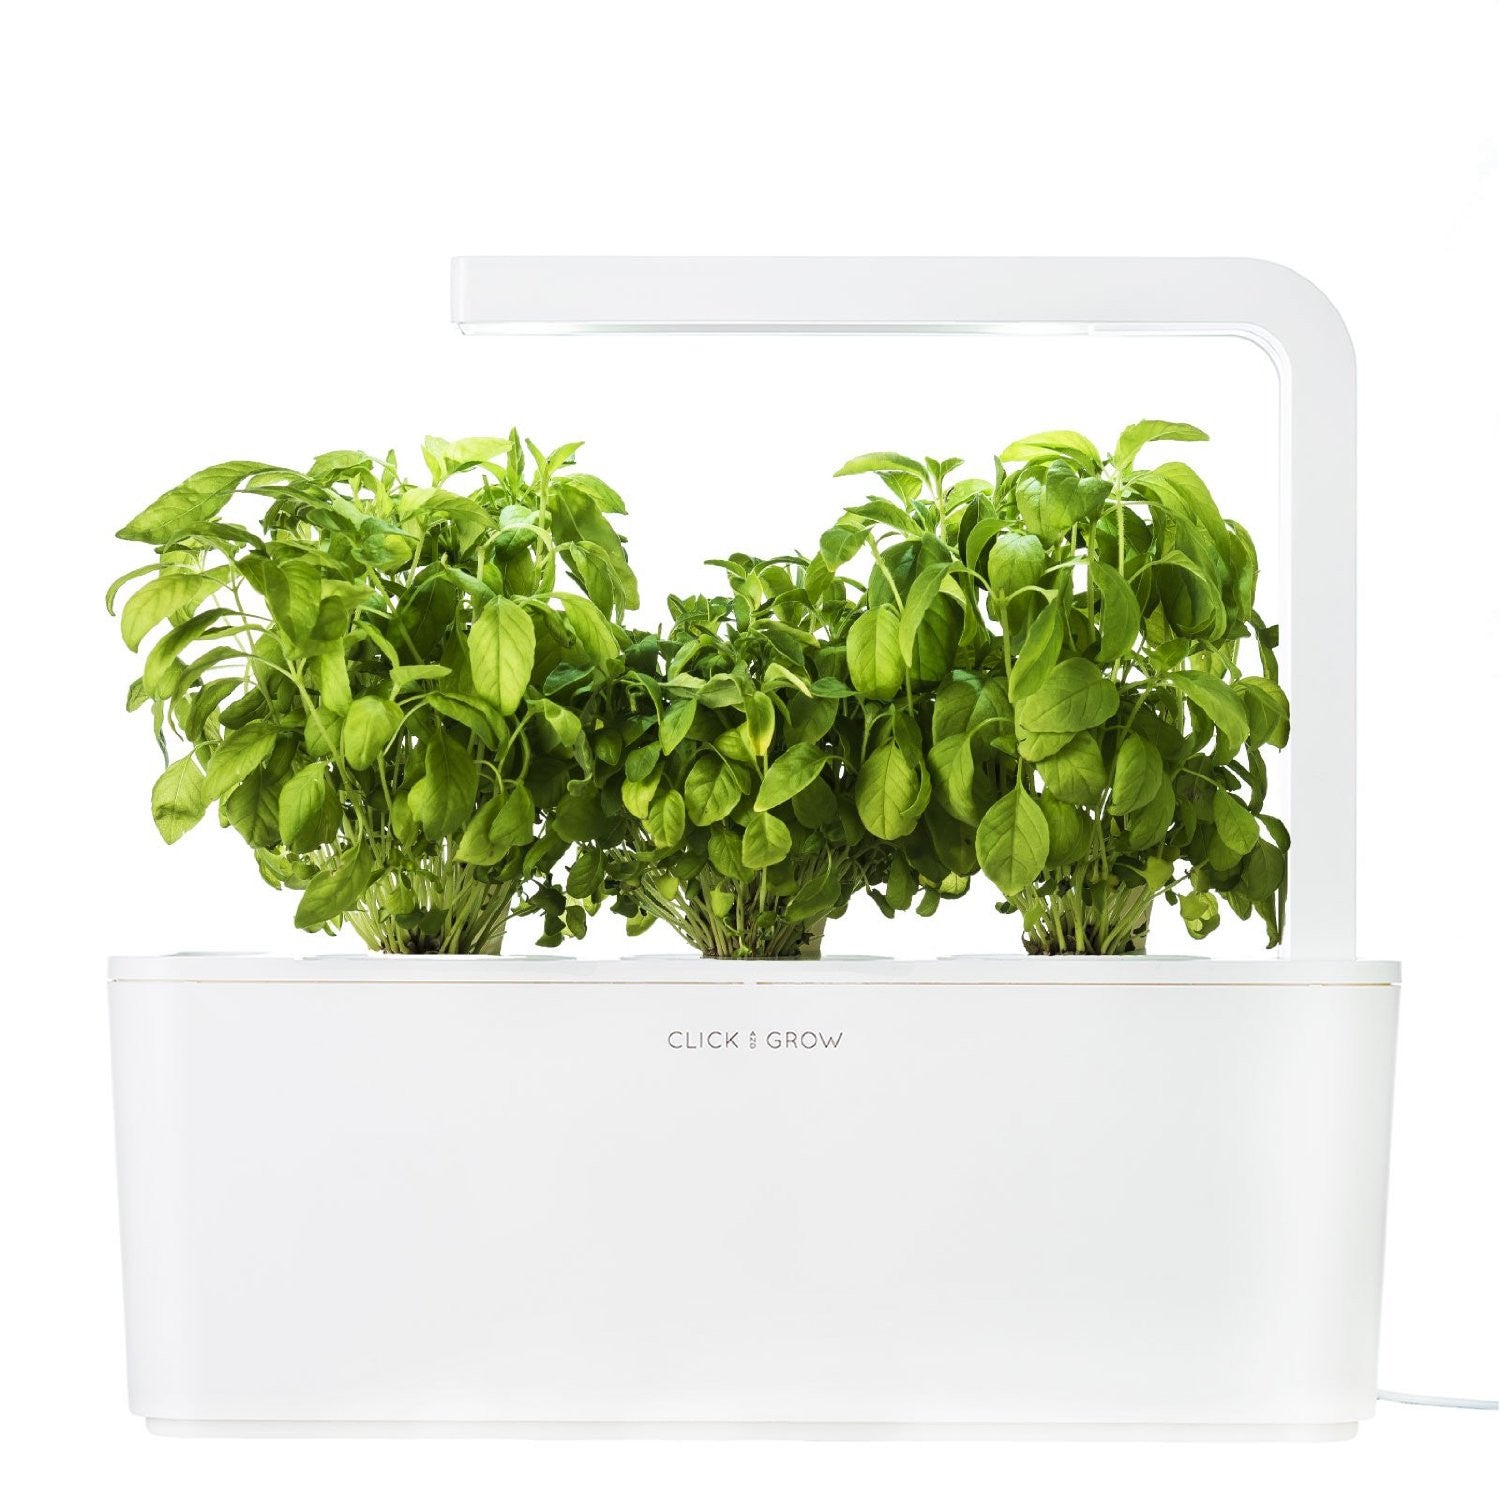 Click & Grow Indoor Smart Herb Garden with 3 Basil Cartridges, White Lid - EarthCitizen
 - 1